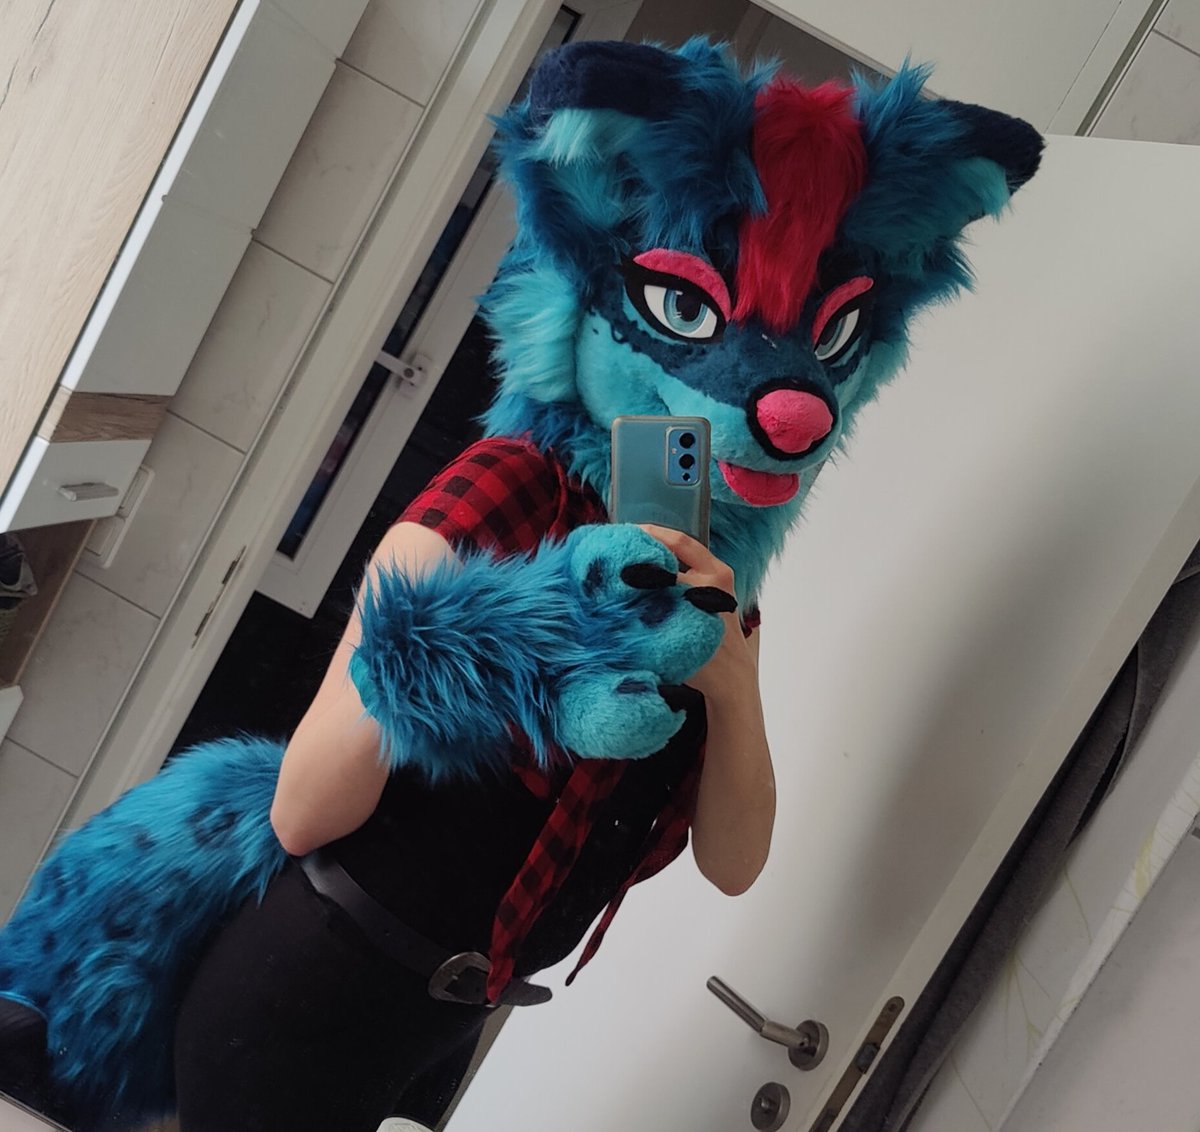 Gonna get my Vapo suit done this year, so excited! 🟦🌀🌊💙

#furry #furrygirls #fursuit